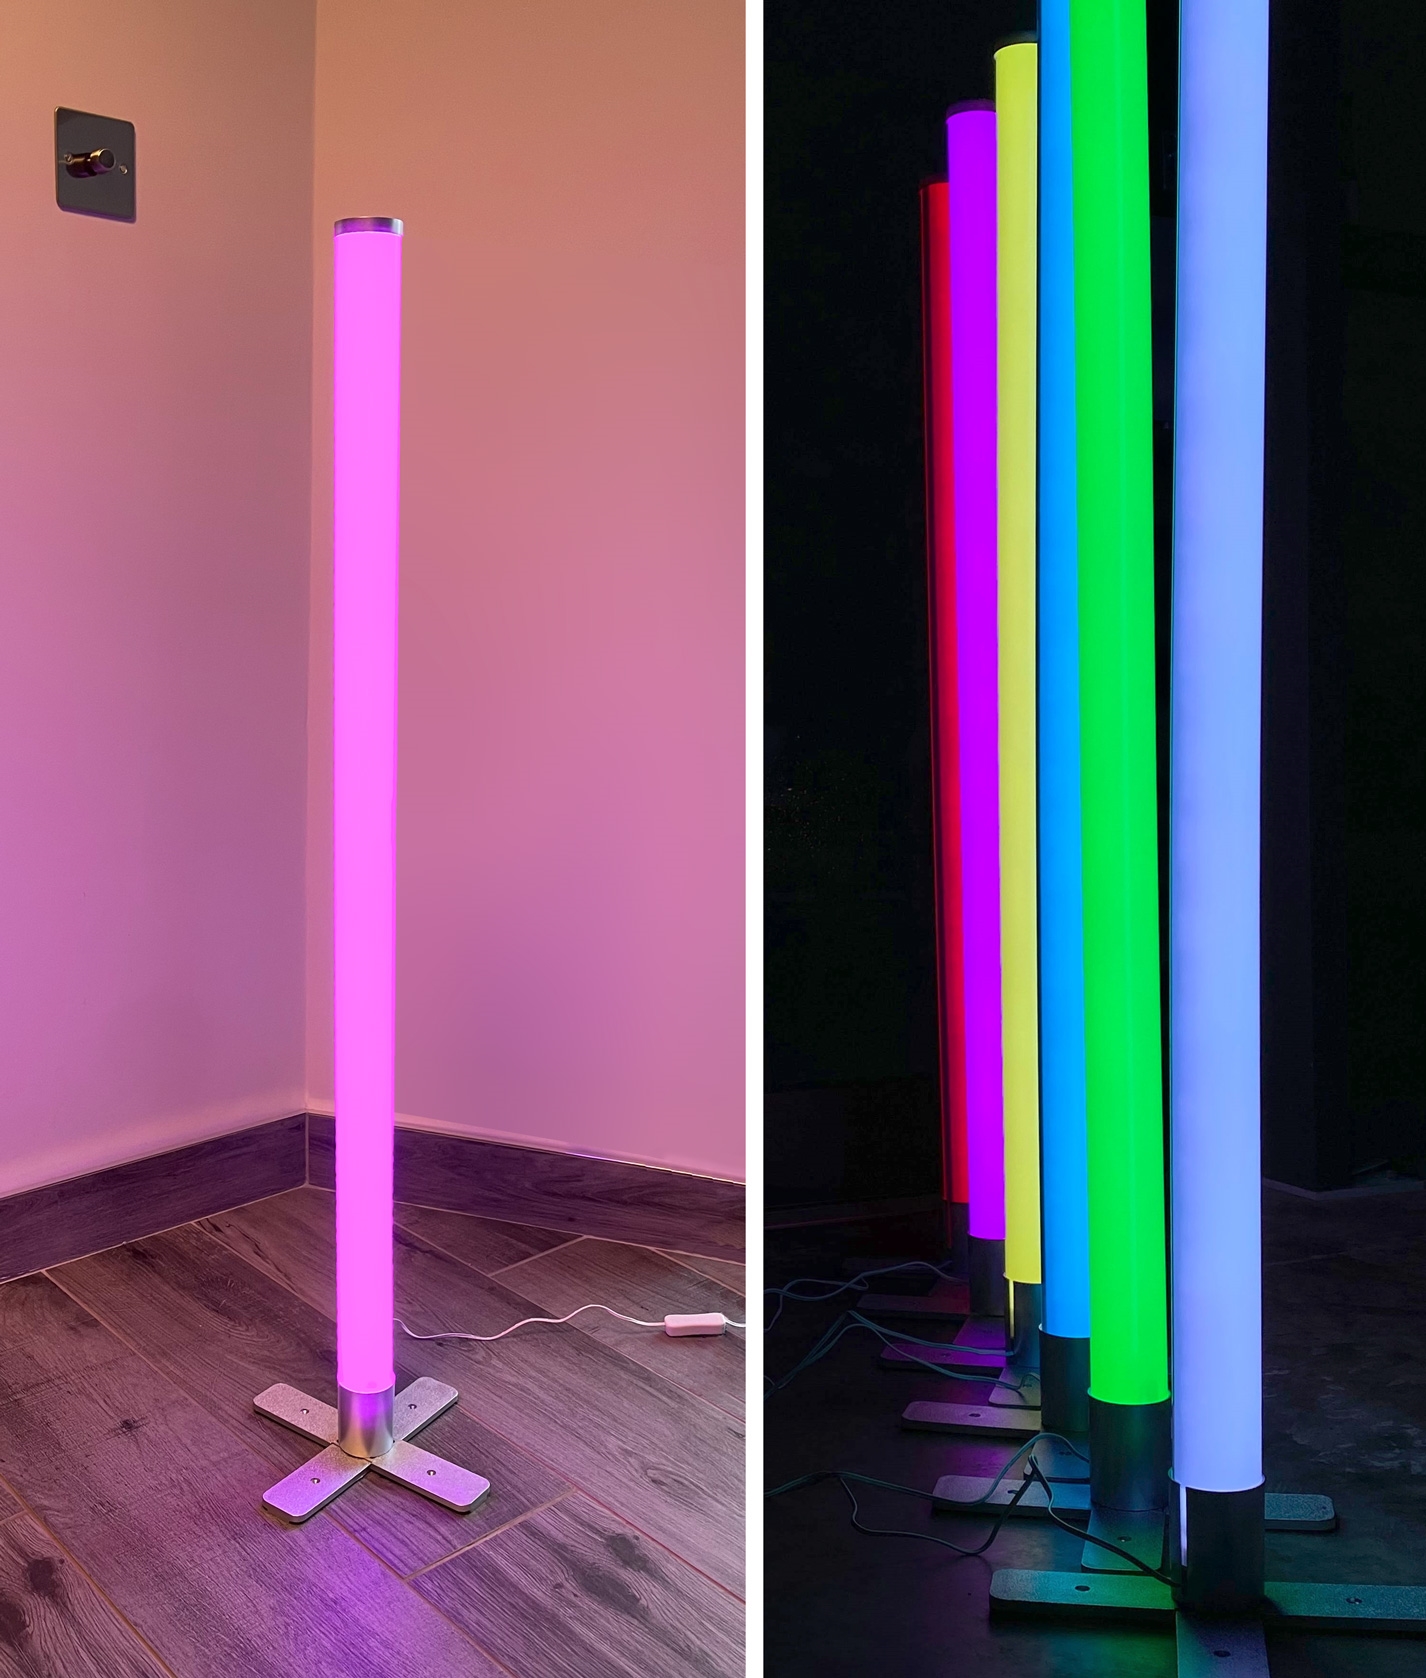 https://www.lightingstyles.co.uk/pics/100/fun-LED-neon-tube-free-standing-light-with-remote-control.jpg